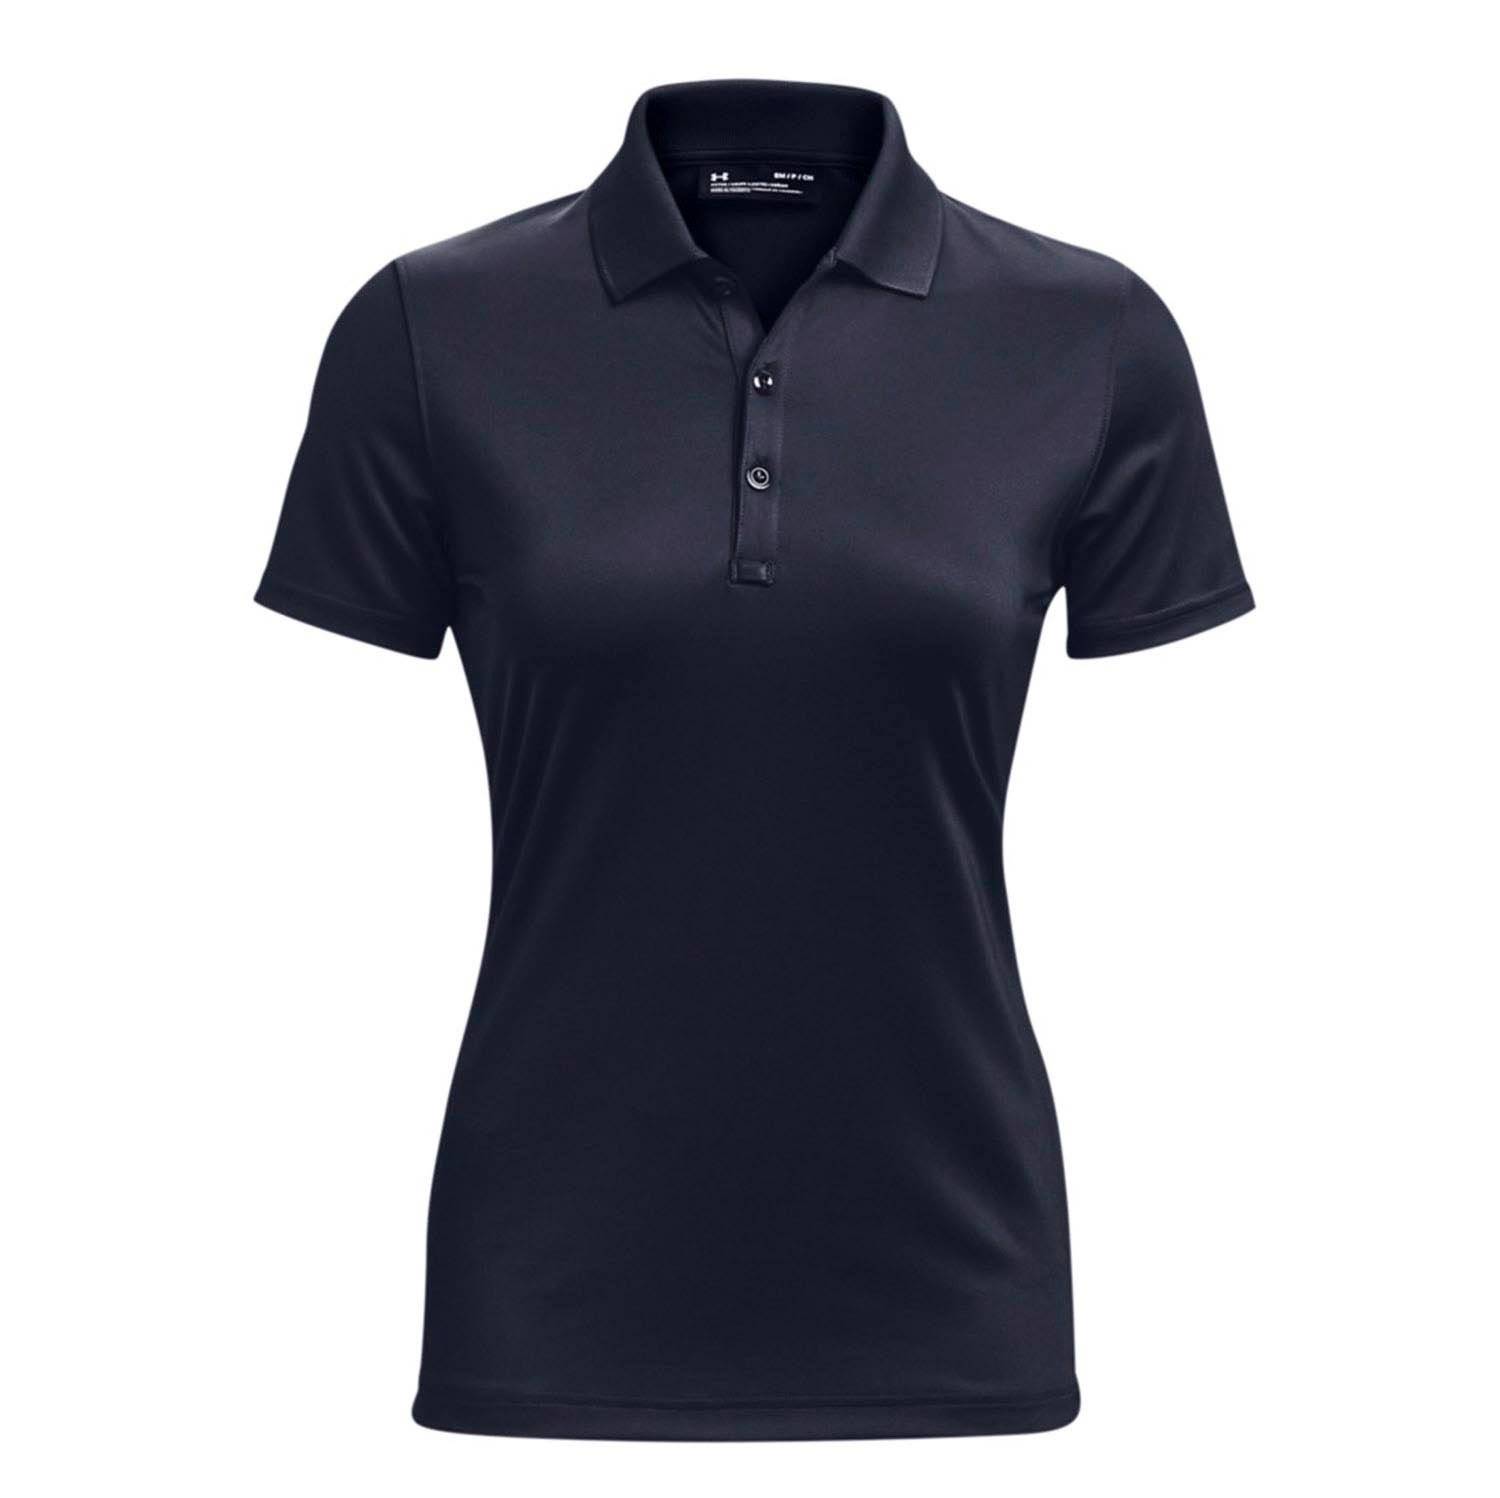 UNDER ARMOUR WOMEN'S TACTICAL PERFORMANCE RANGE POLO 2.0